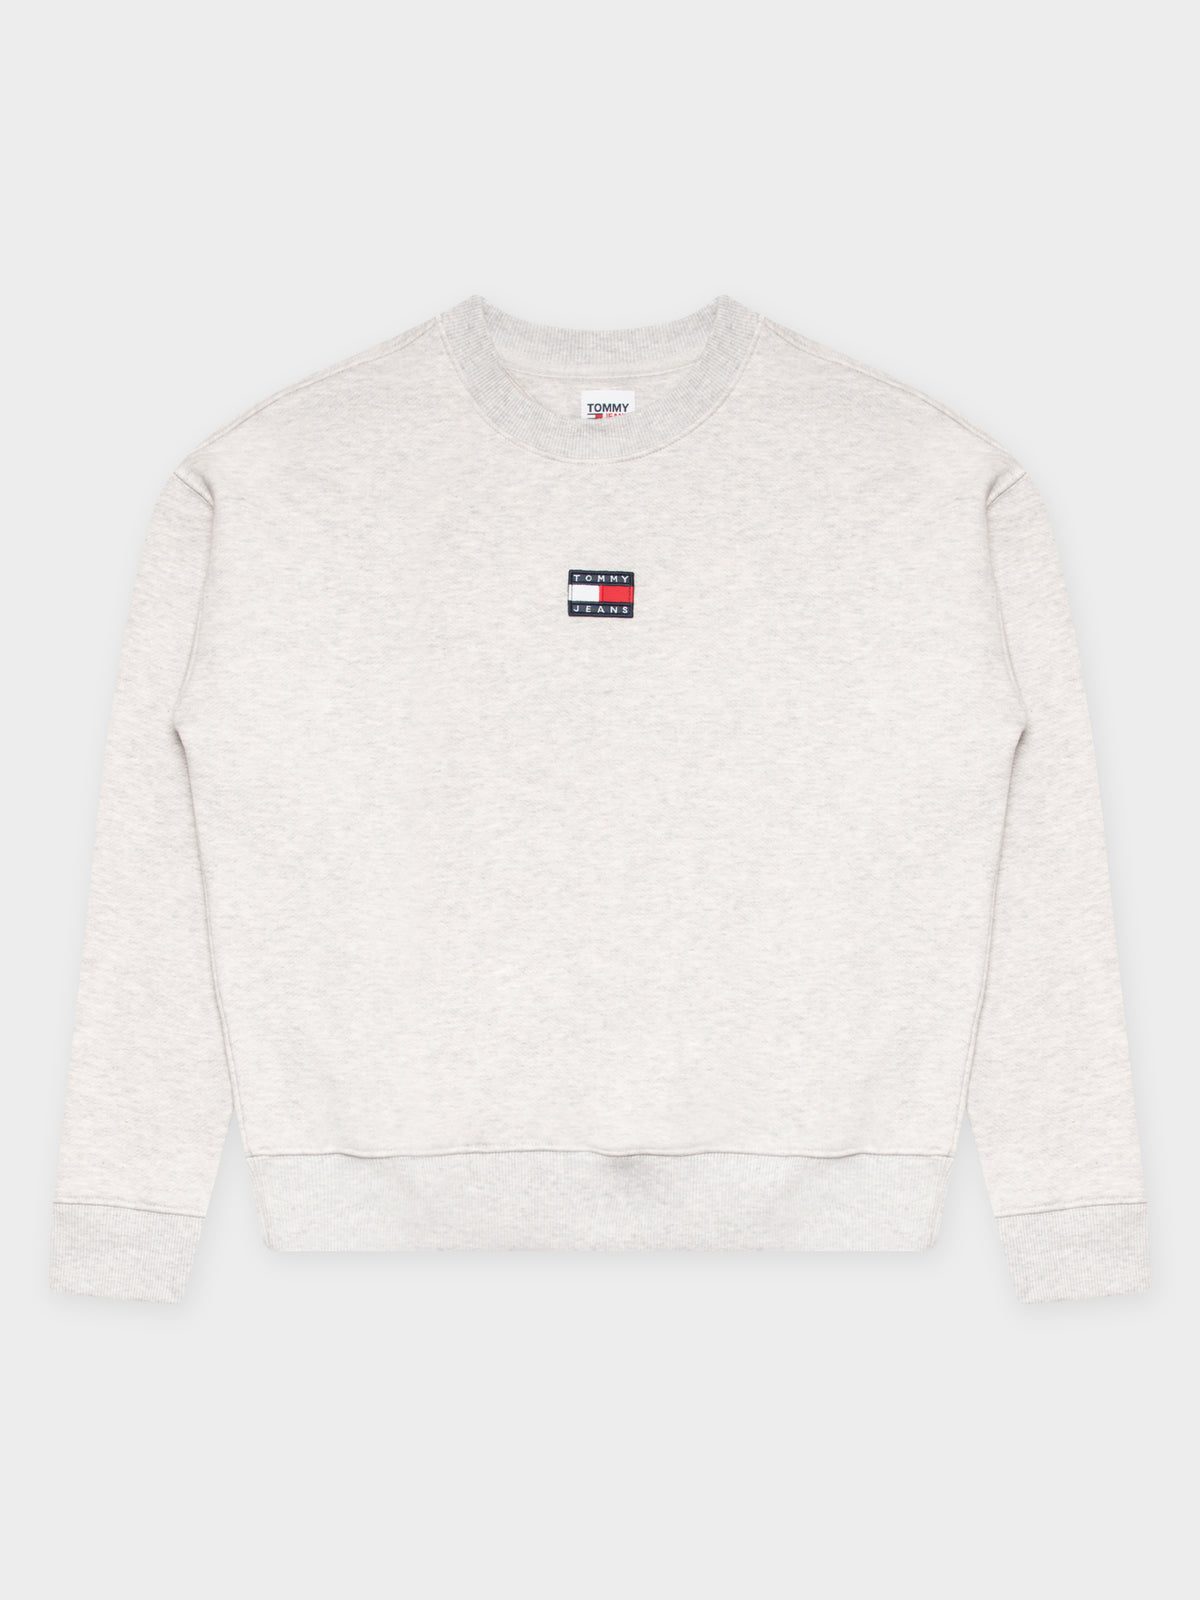 Tommy Centre Badge Crew in Silver Grey Heather